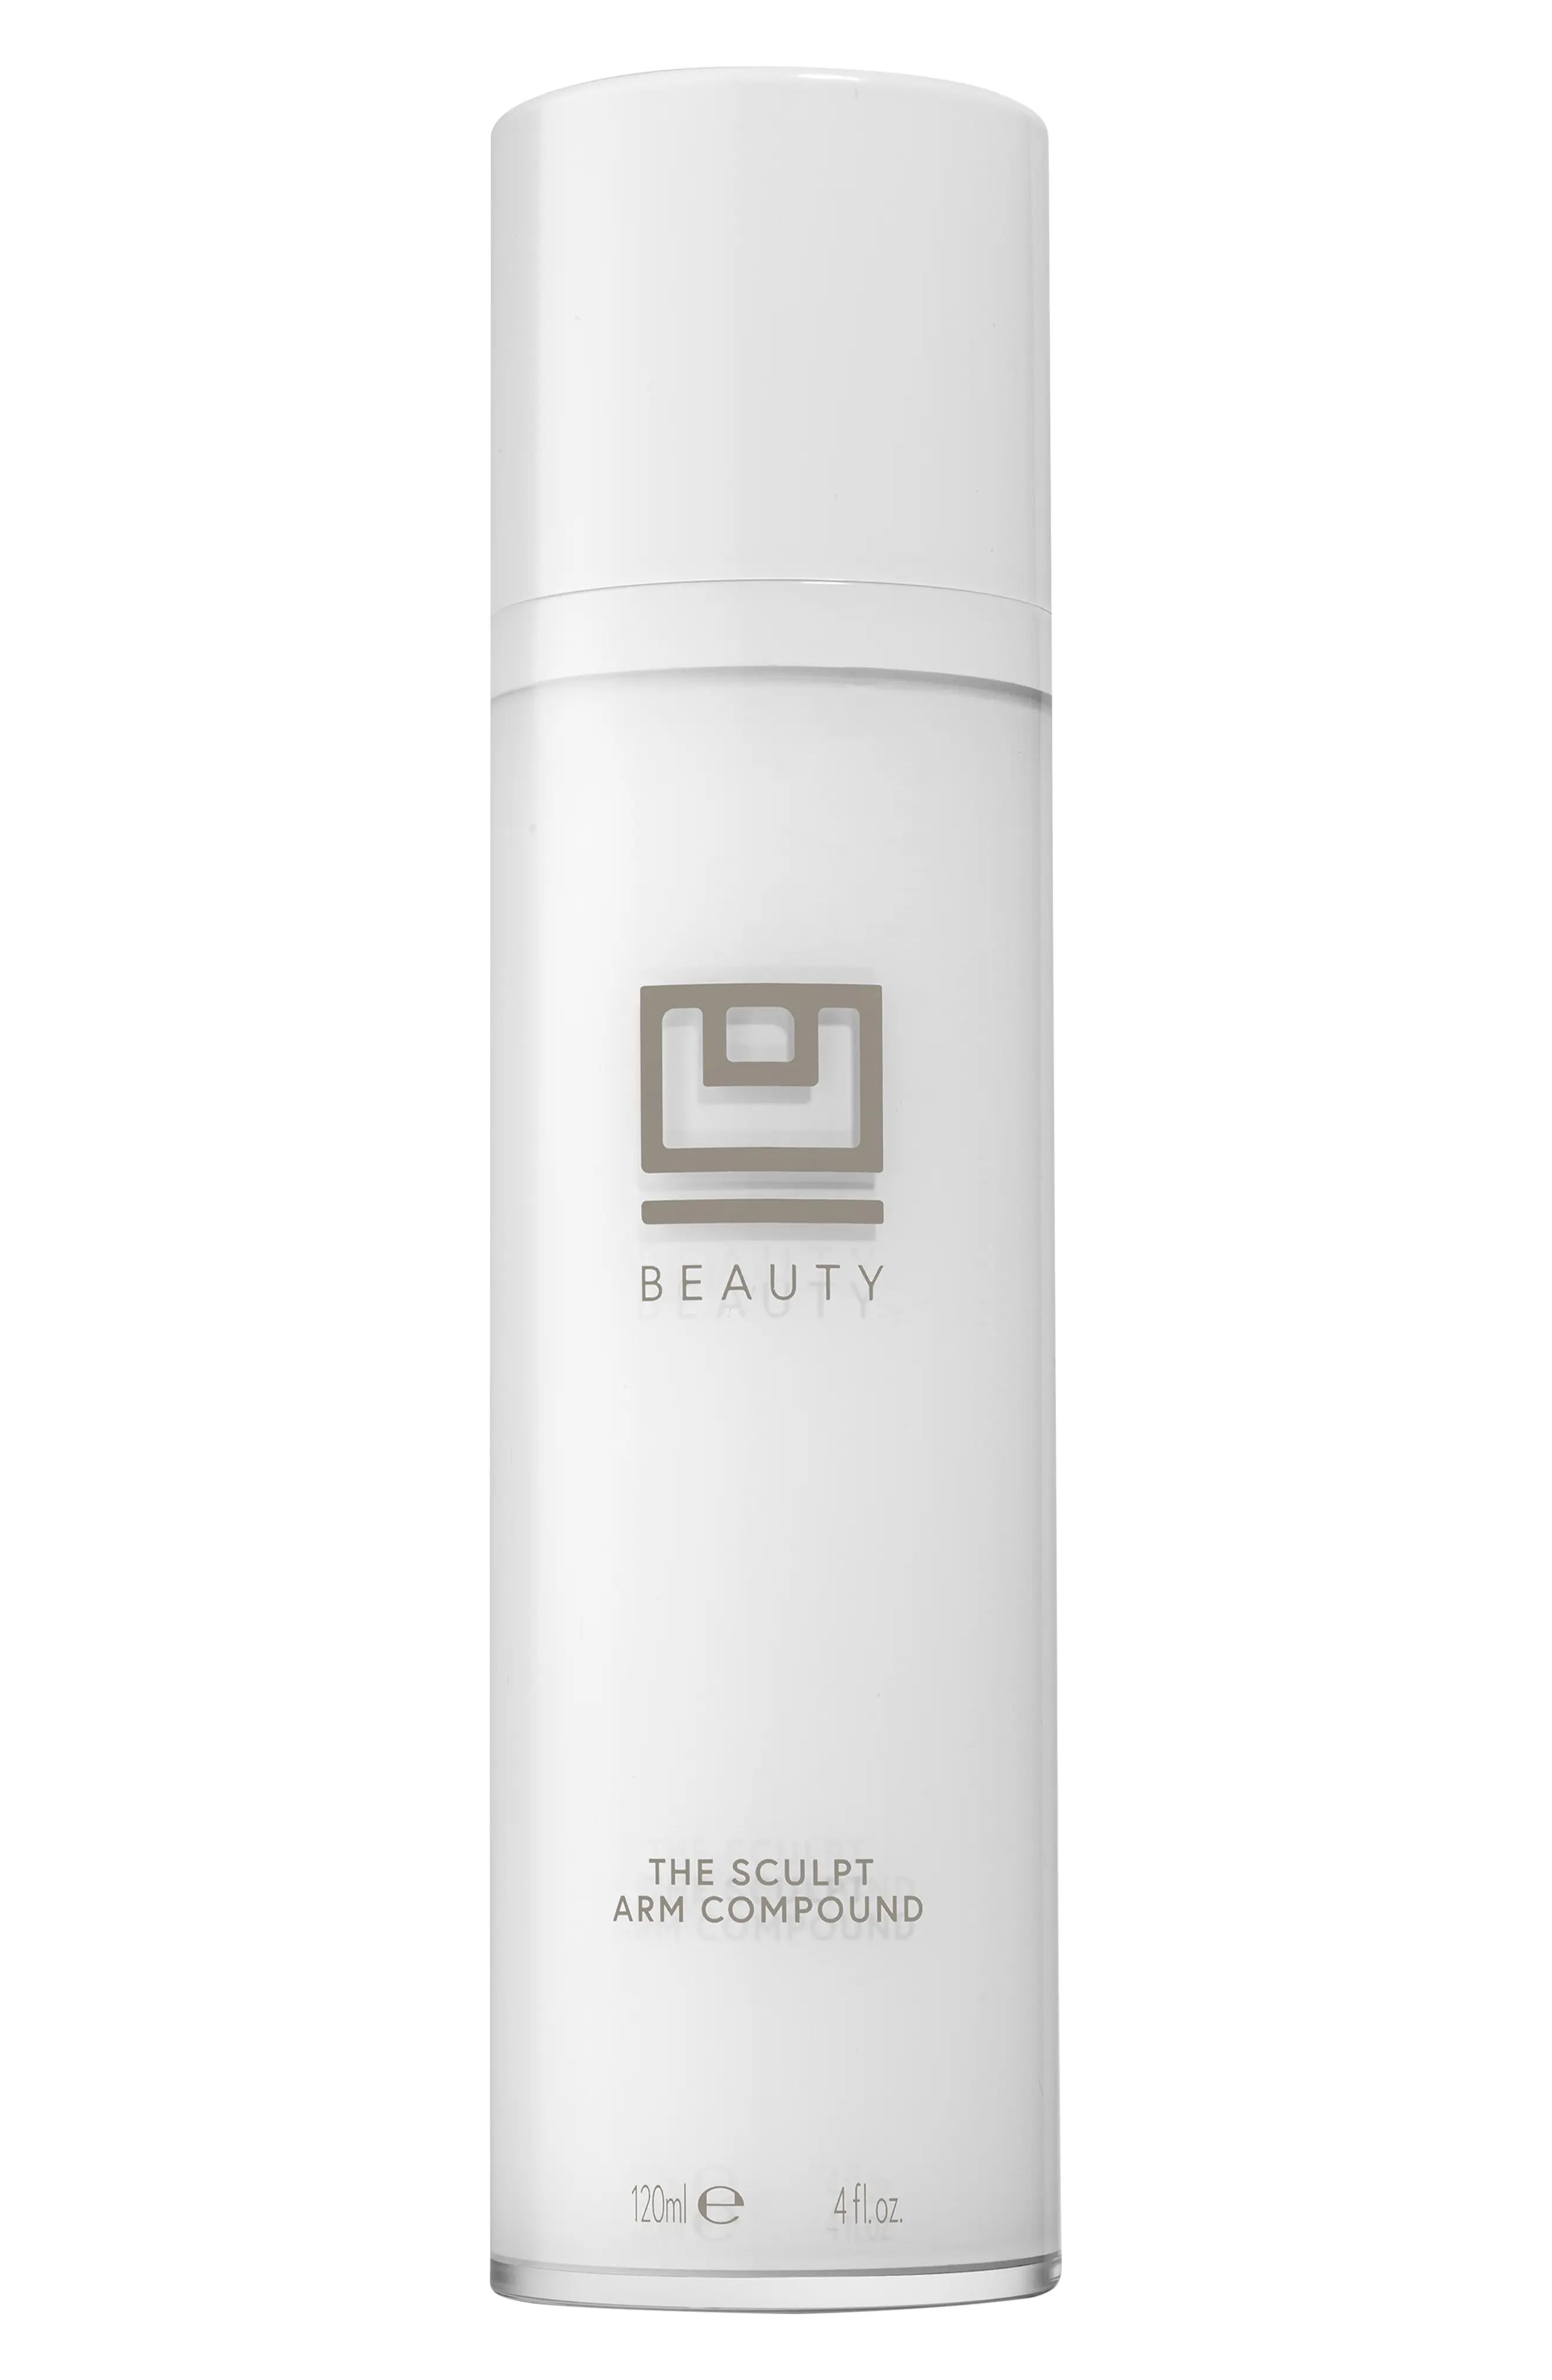 U BEAUTY The Sculpt Arm Compound at Nordstrom | Nordstrom